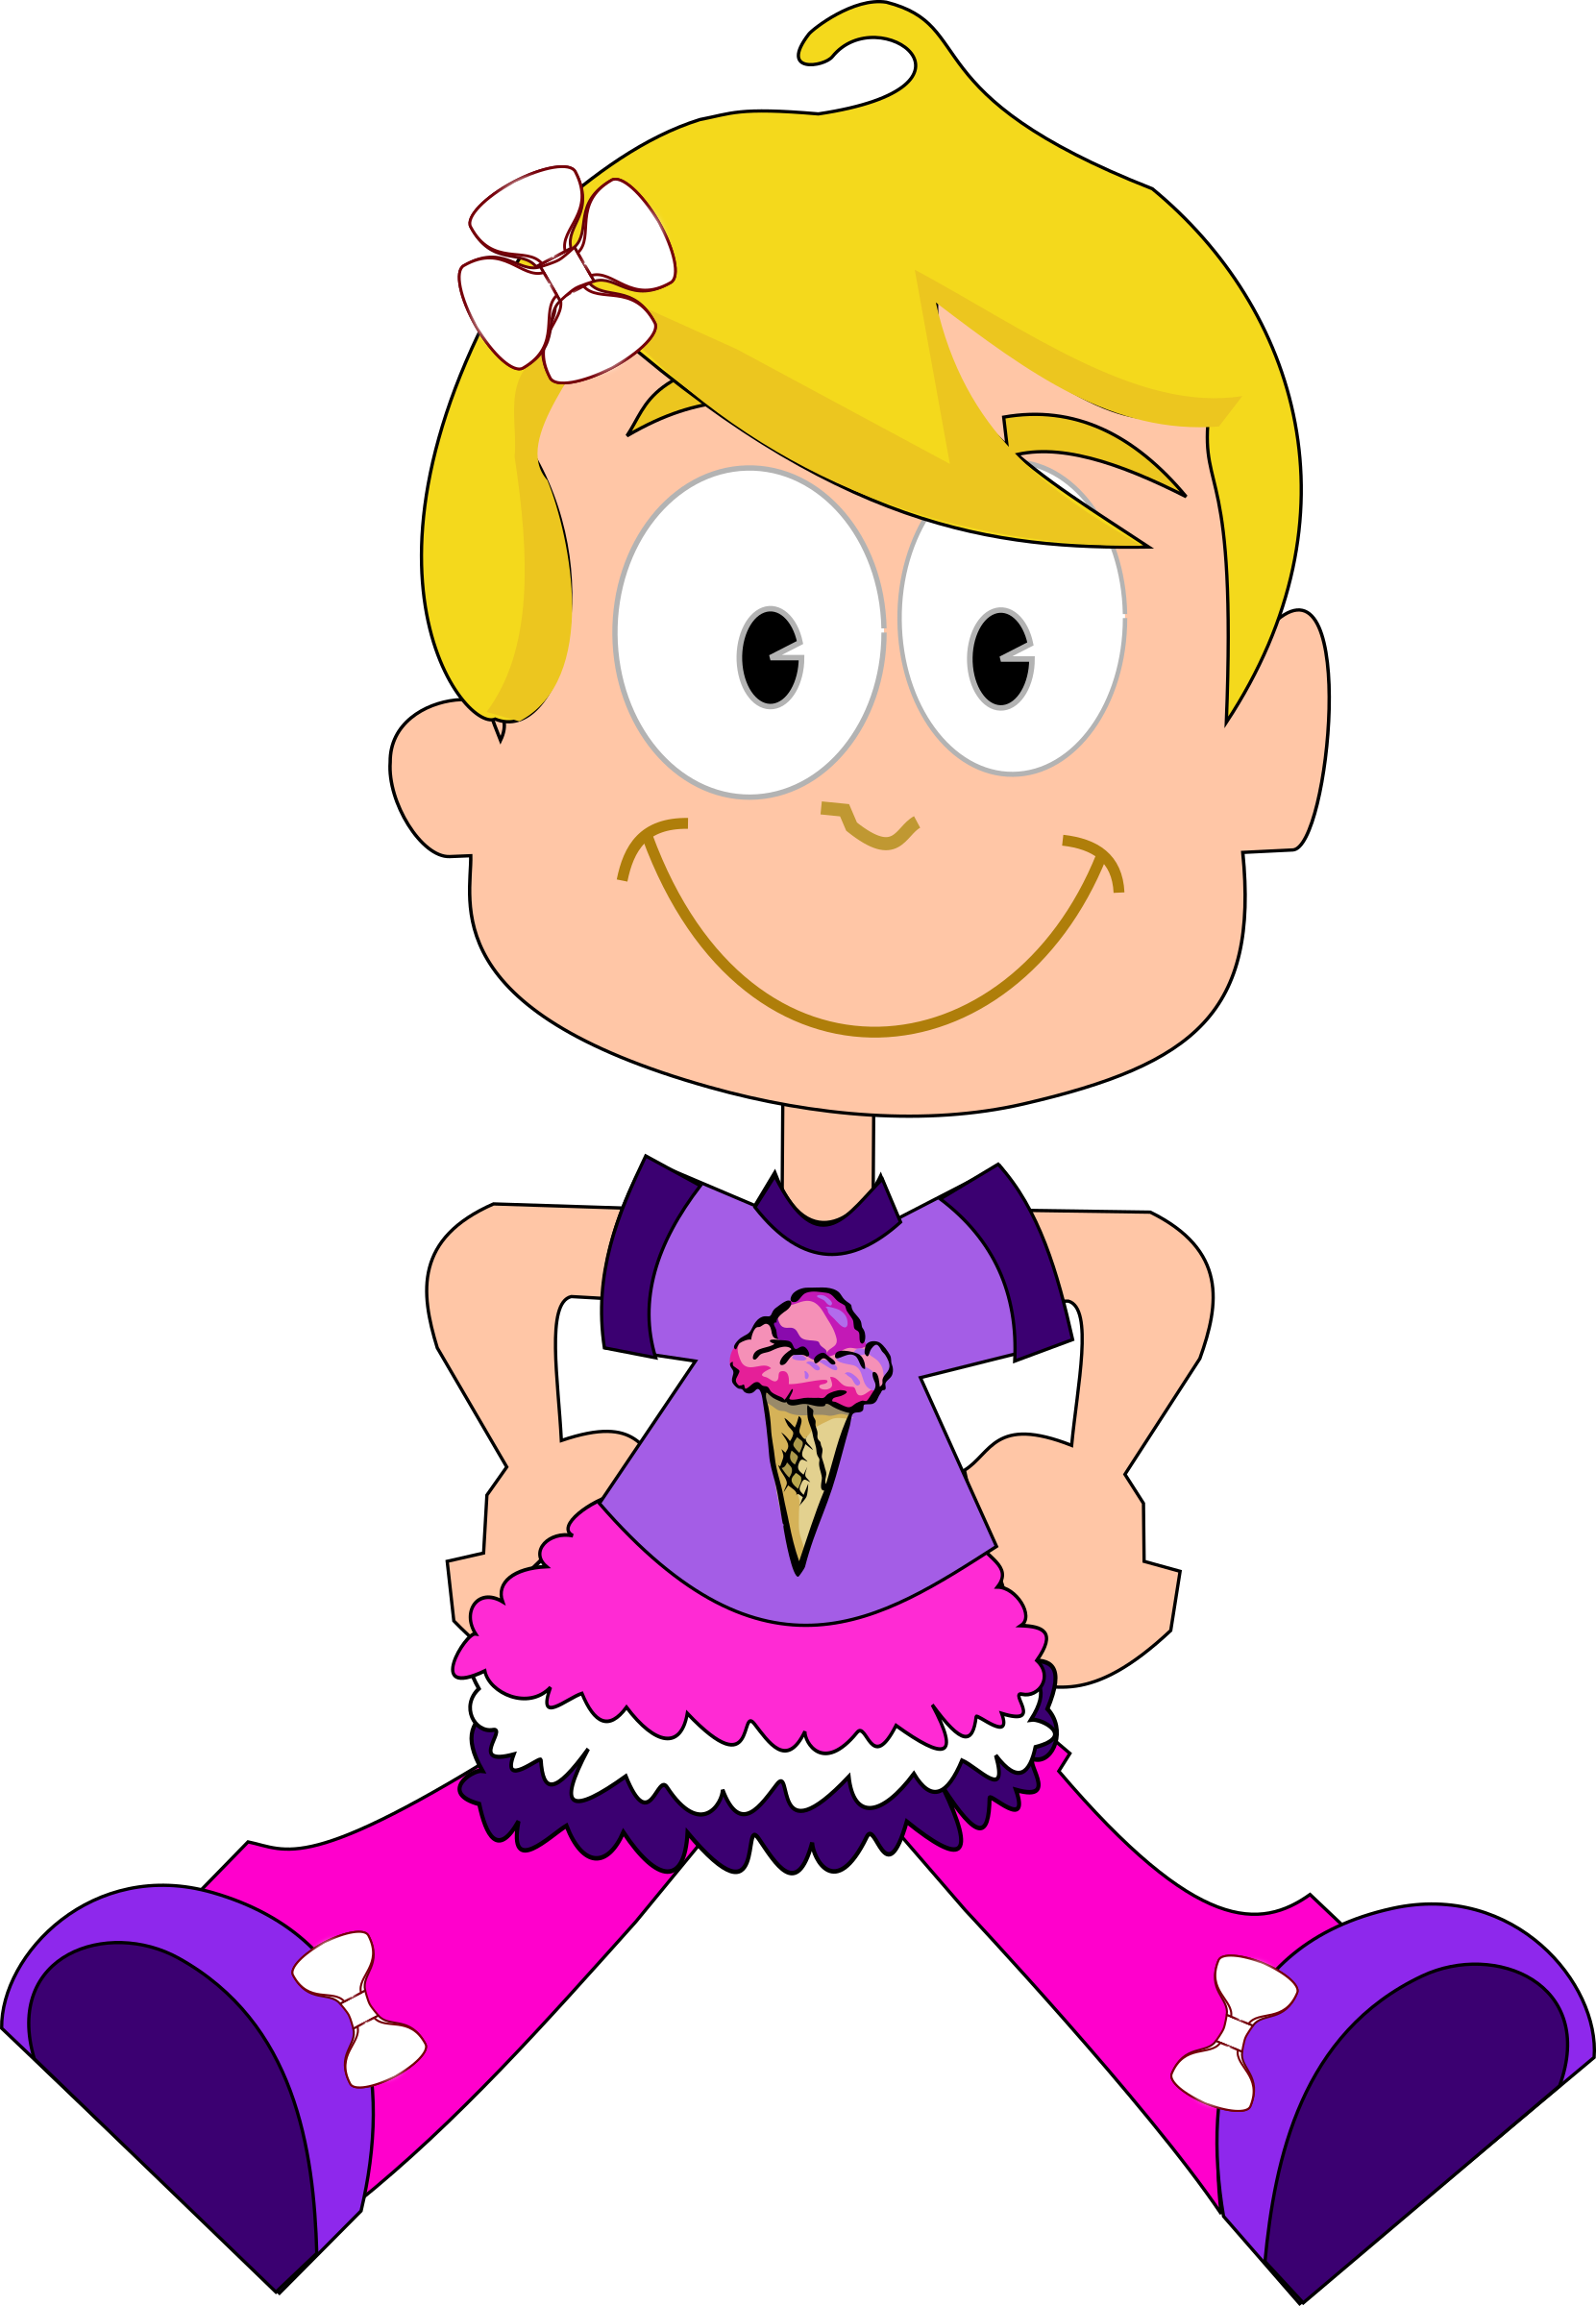 https://openclipart.org/image/2400px/svg_to_png/227689/Bethany.png